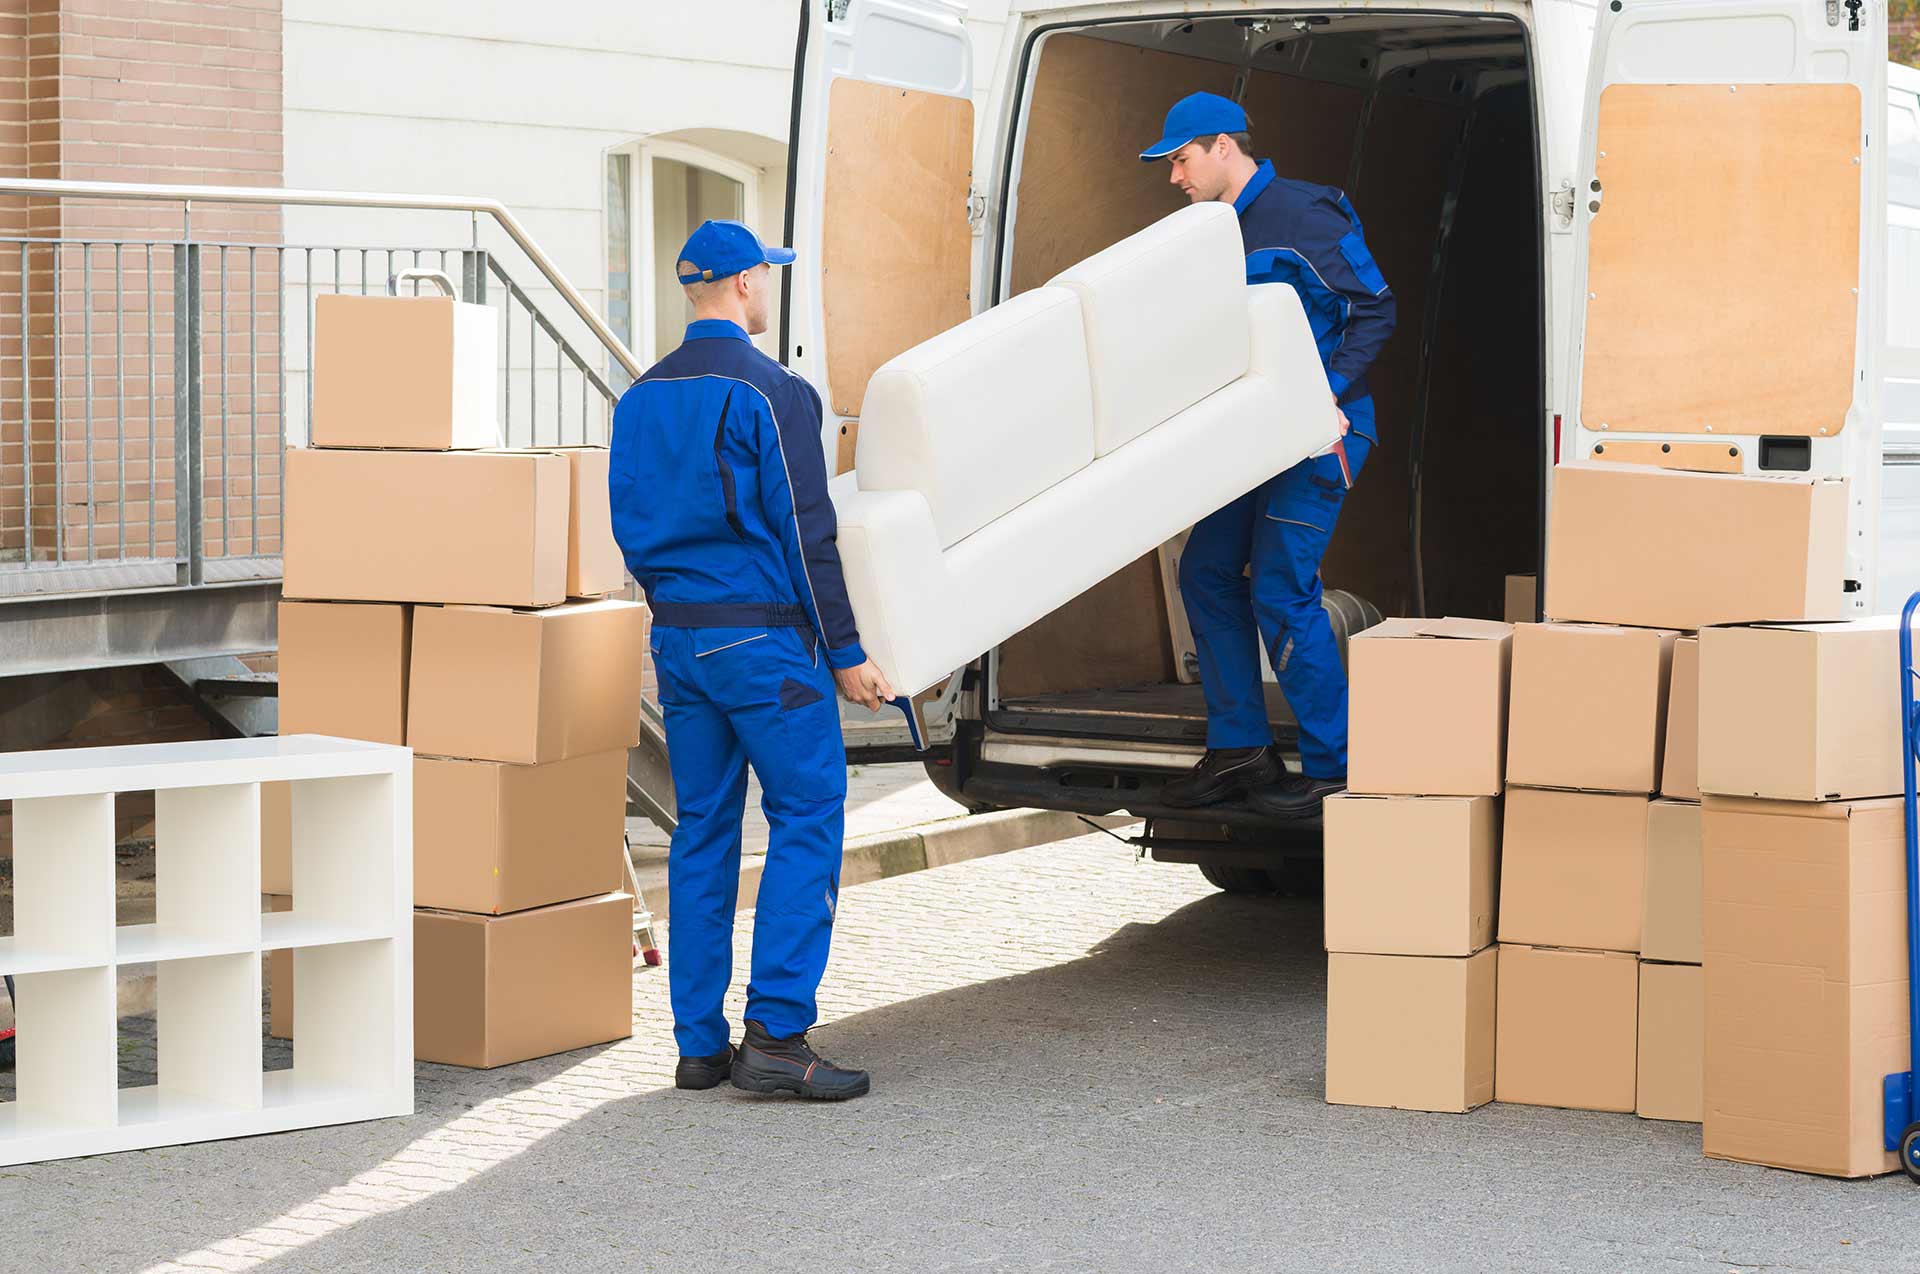 10 Questions to Ask When Choosing a Professional Moving Company